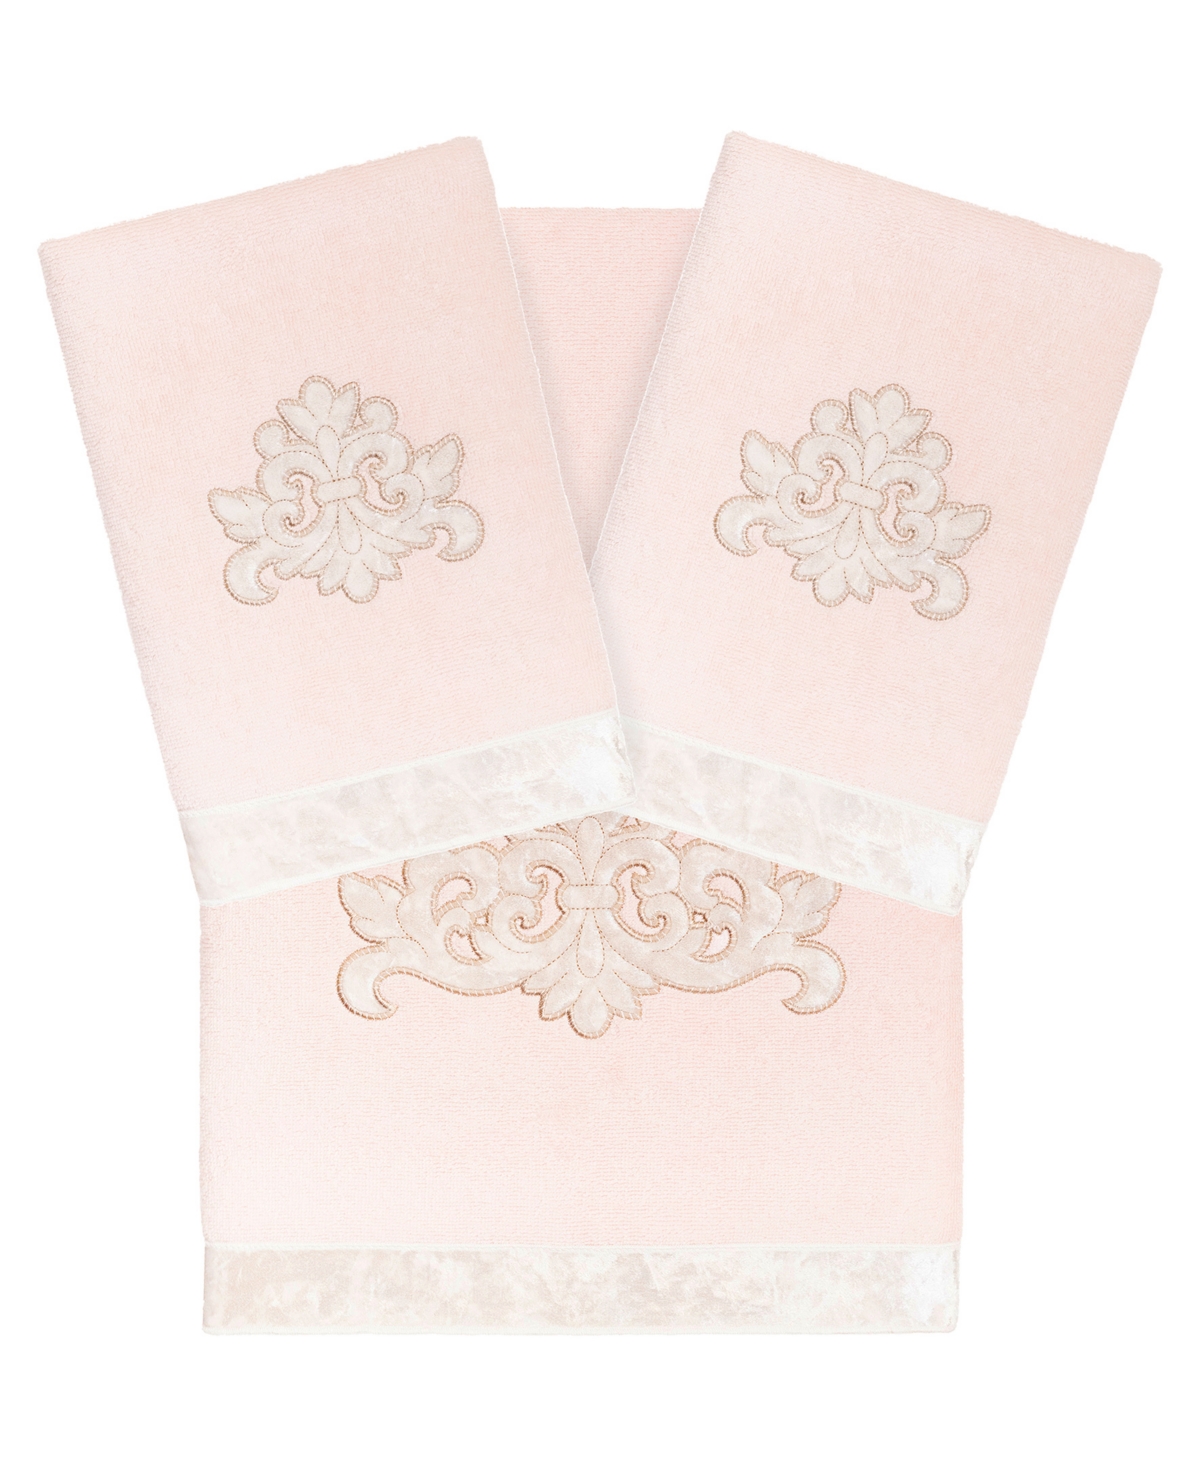 Linum Home Textiles Turkish Cotton May Embellished Towel Set, 3 Piece Bedding In Blush